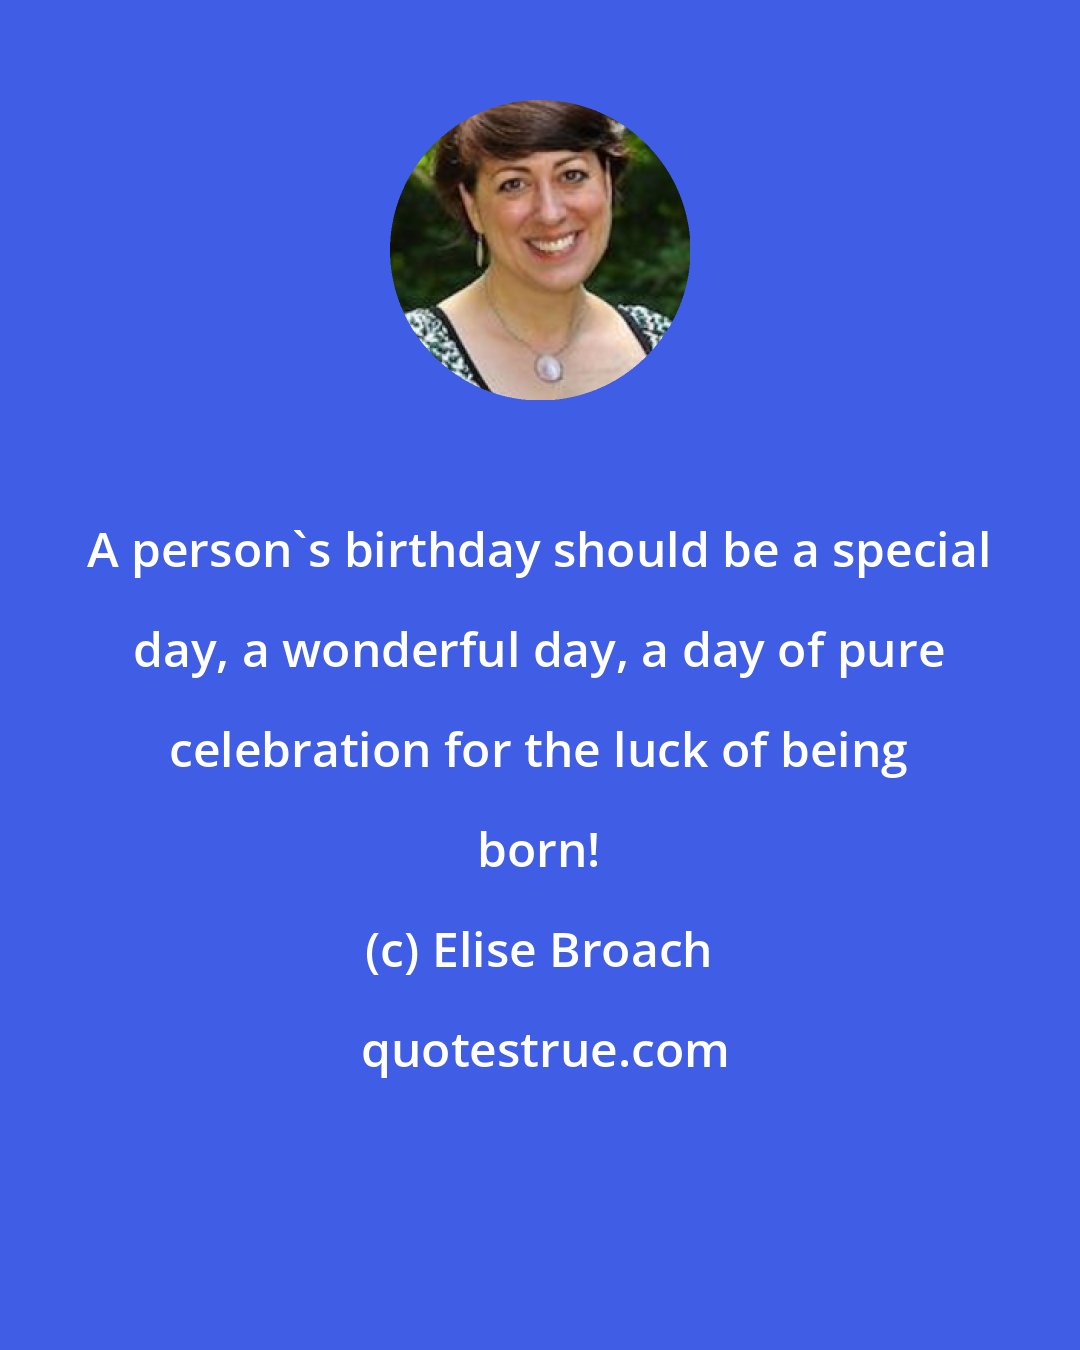 Elise Broach: A person's birthday should be a special day, a wonderful day, a day of pure celebration for the luck of being born!